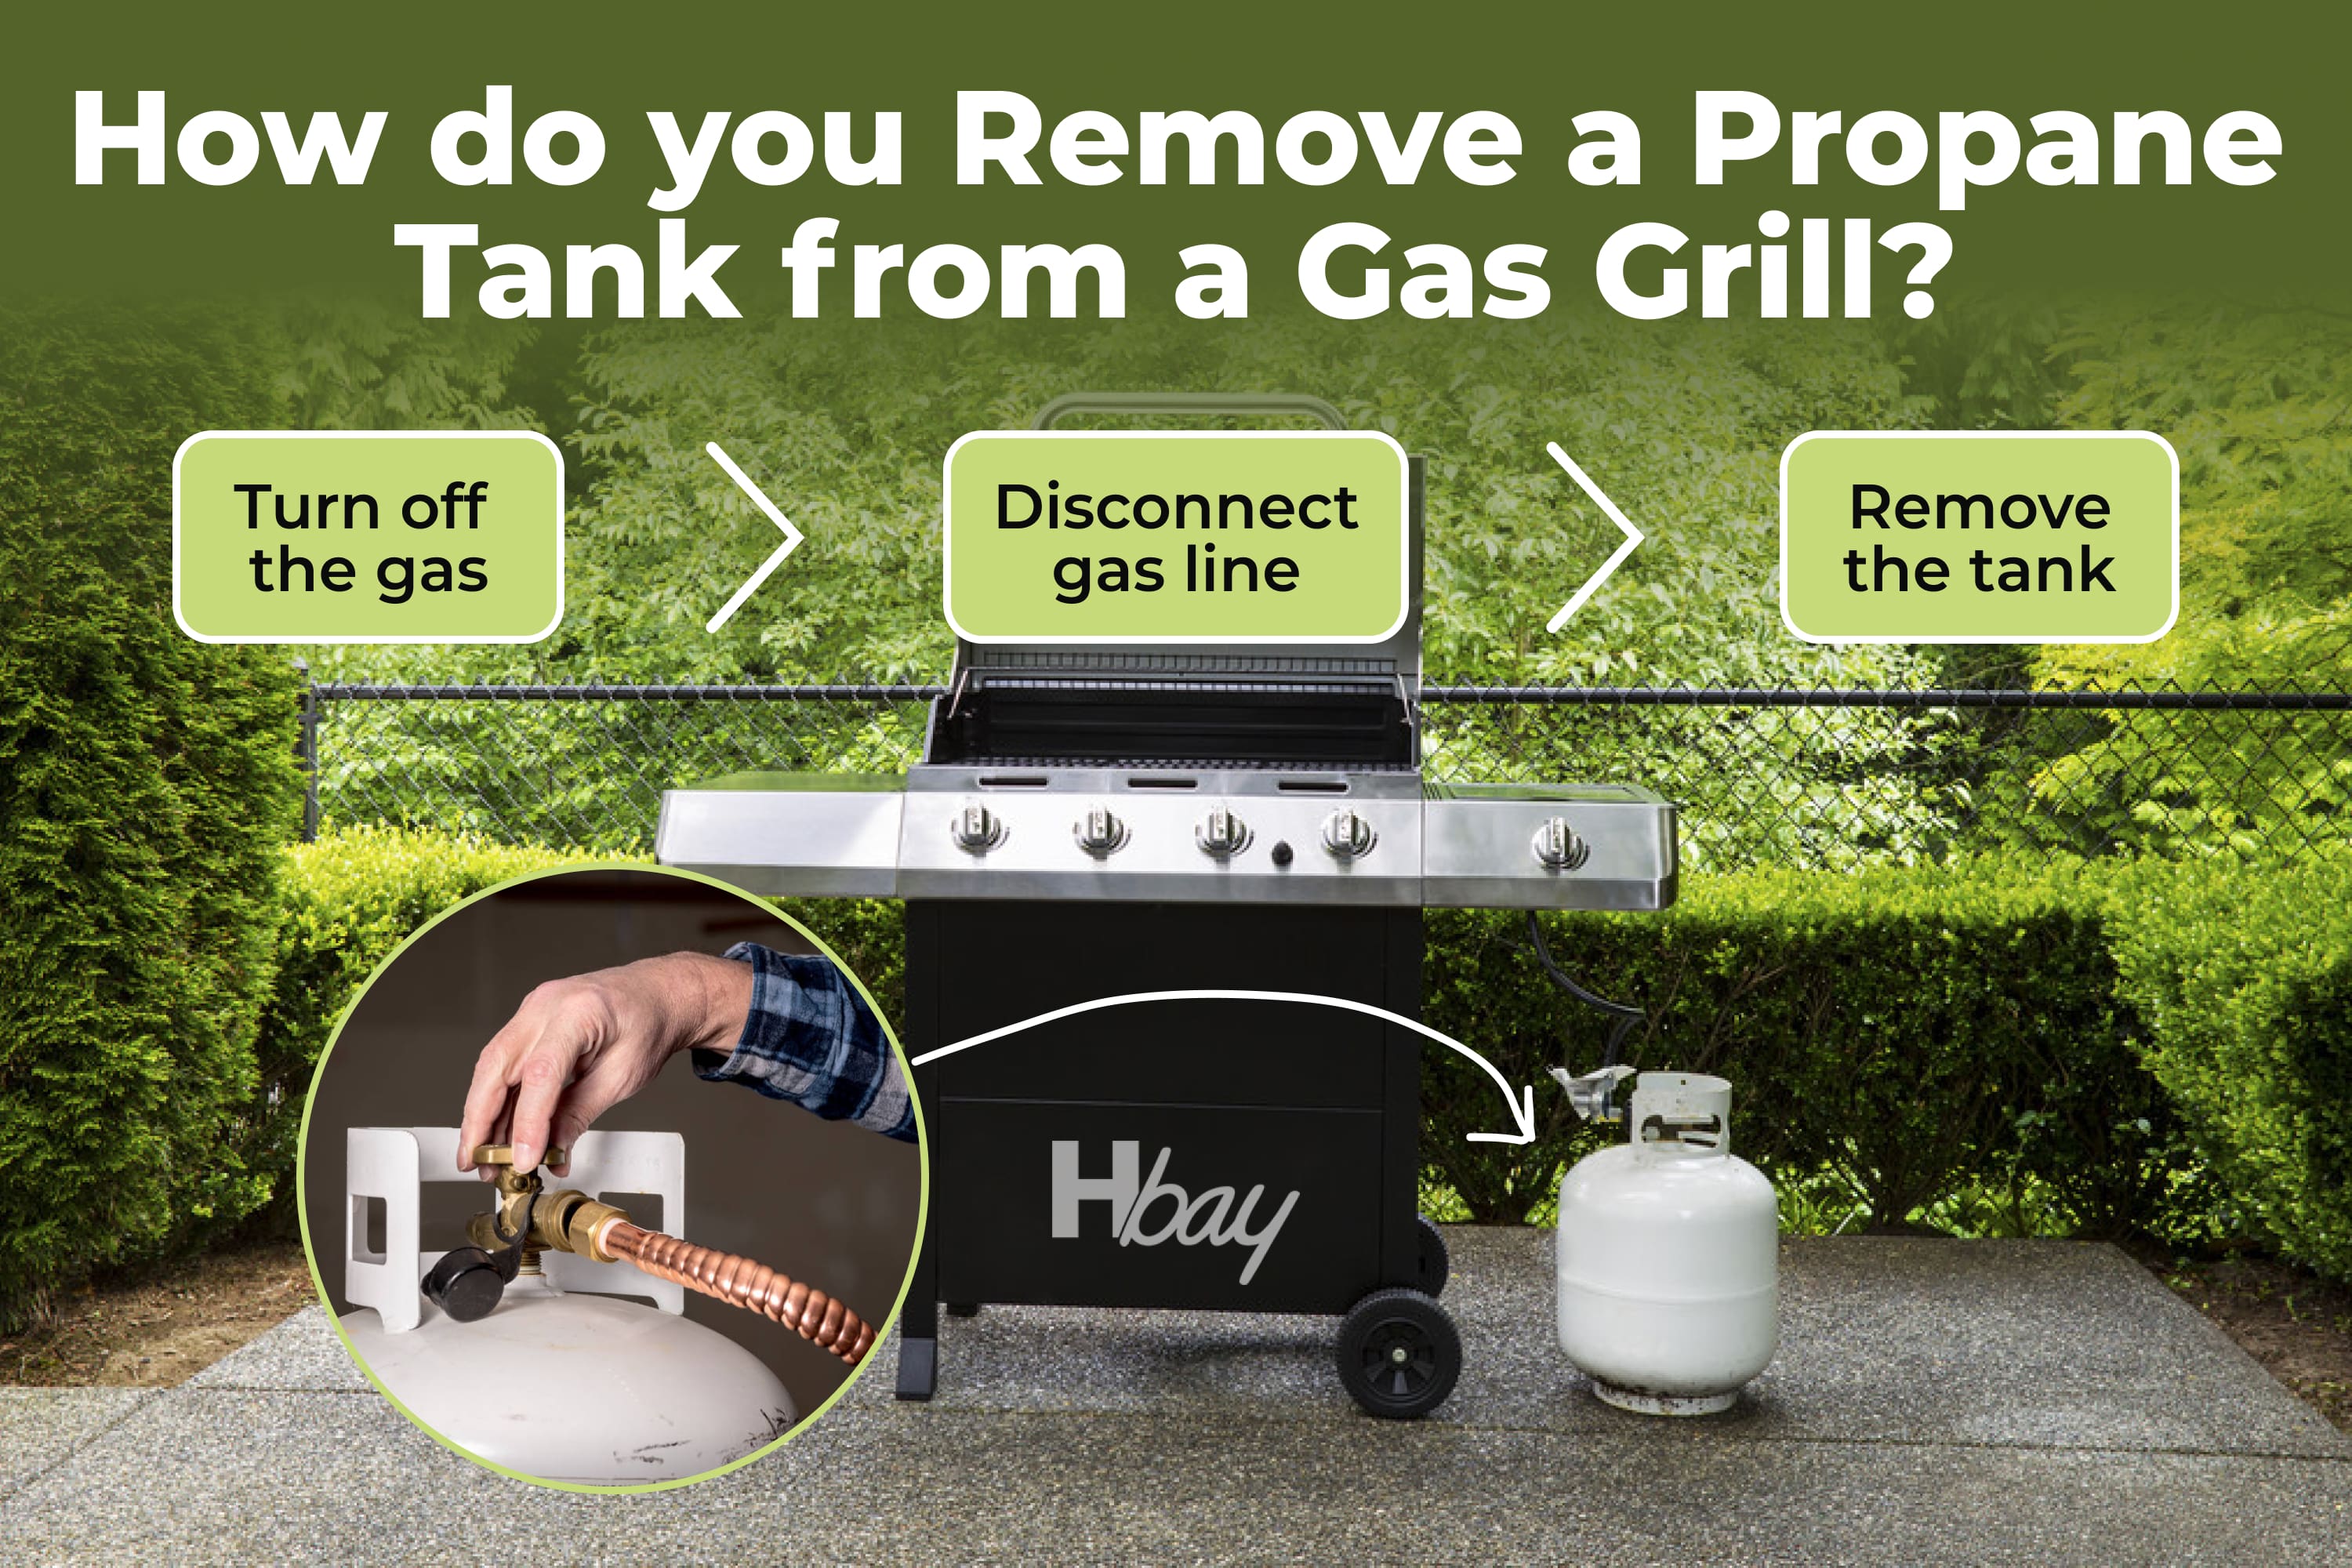 How do you remove a propane tank from a gas grill